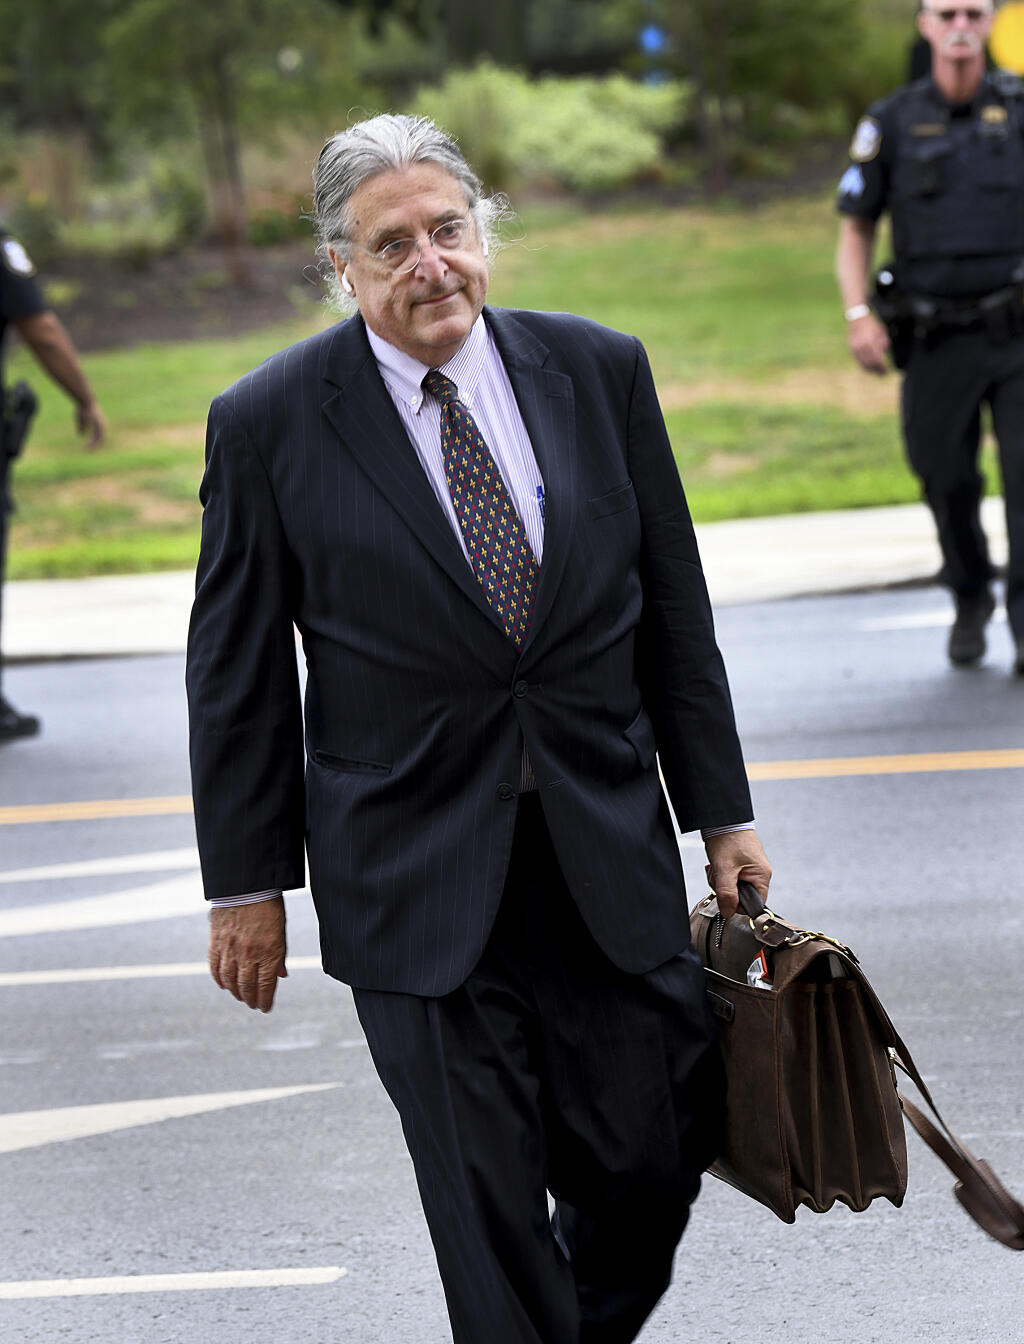 Norm Pattis, attorney for conspiracy theorist Alex Jones, arrives at Waterbury Superior Court, Tuesday morning, Sept. 13, 2022, in Waterbury, Conn., for the start of Jones' trial. A Connecticut jury began hearing arguments Tuesday in a trial to decide how much money Jones should pay relatives of victims of the Sandy Hook Elementary School shooting for spreading a lie that the massacre was a hoax. (Carol Kaliff/Hearst Connecticut Media via AP)